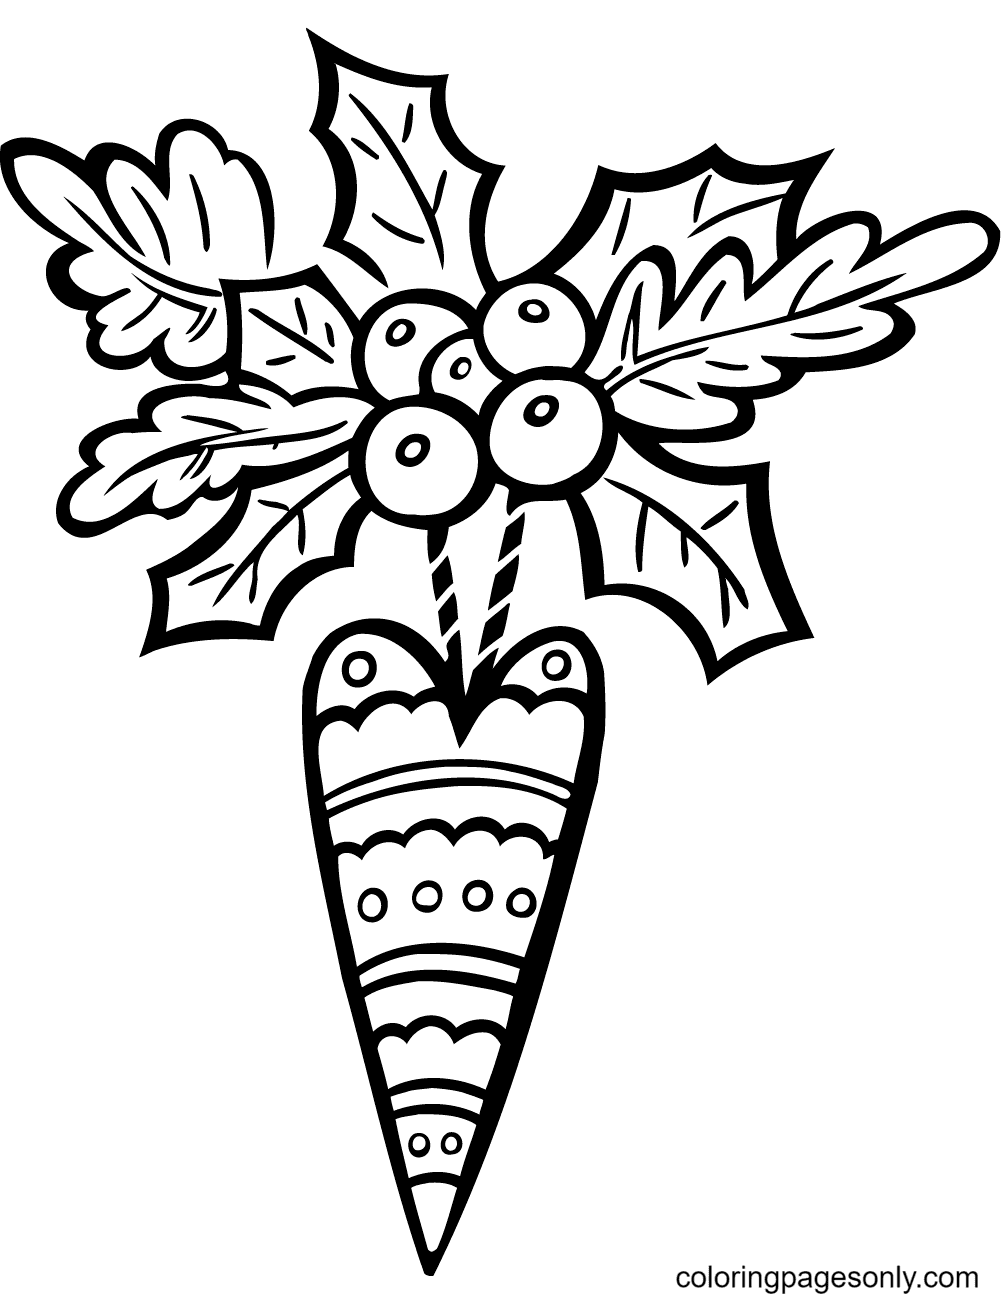 Christmas Decorations Free Coloring Page